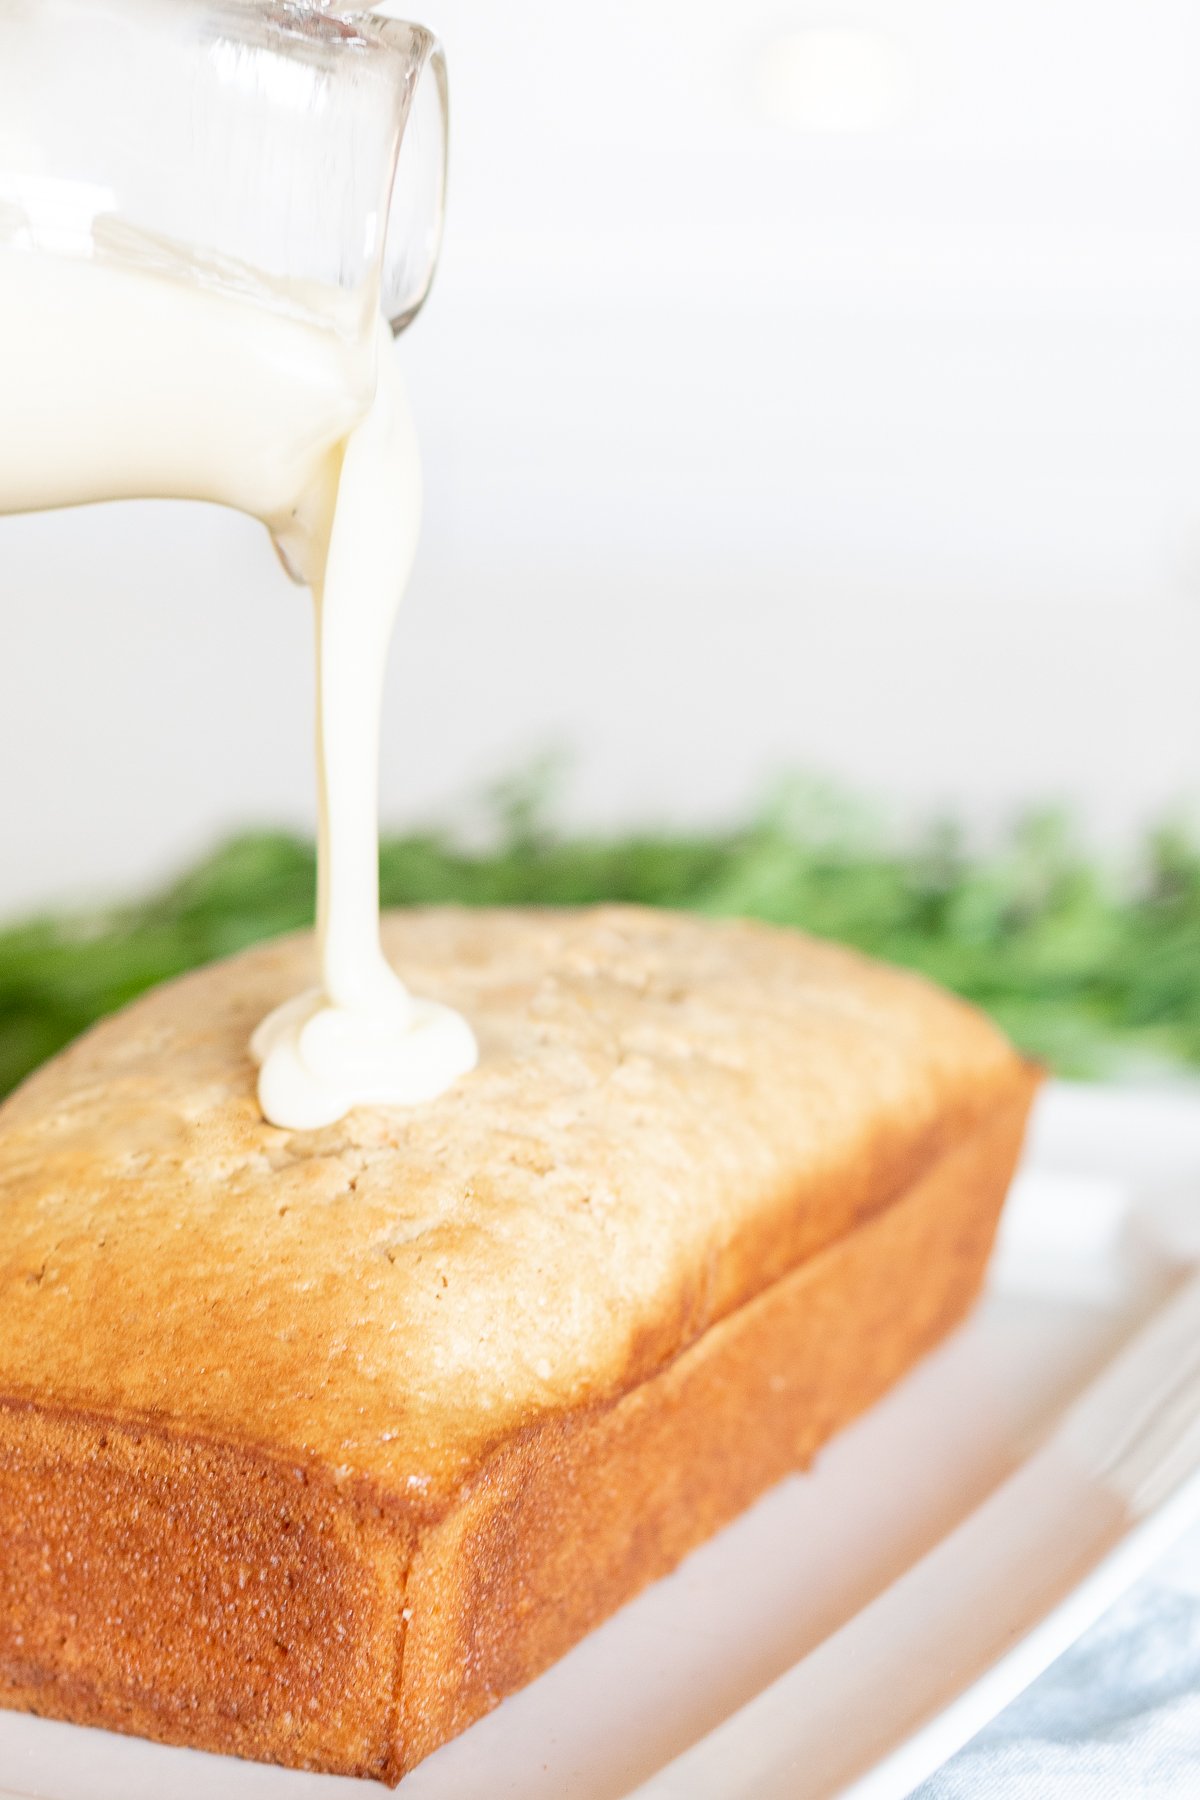 Pouring cream cheese glaze over a freshly baked loaf of bread.